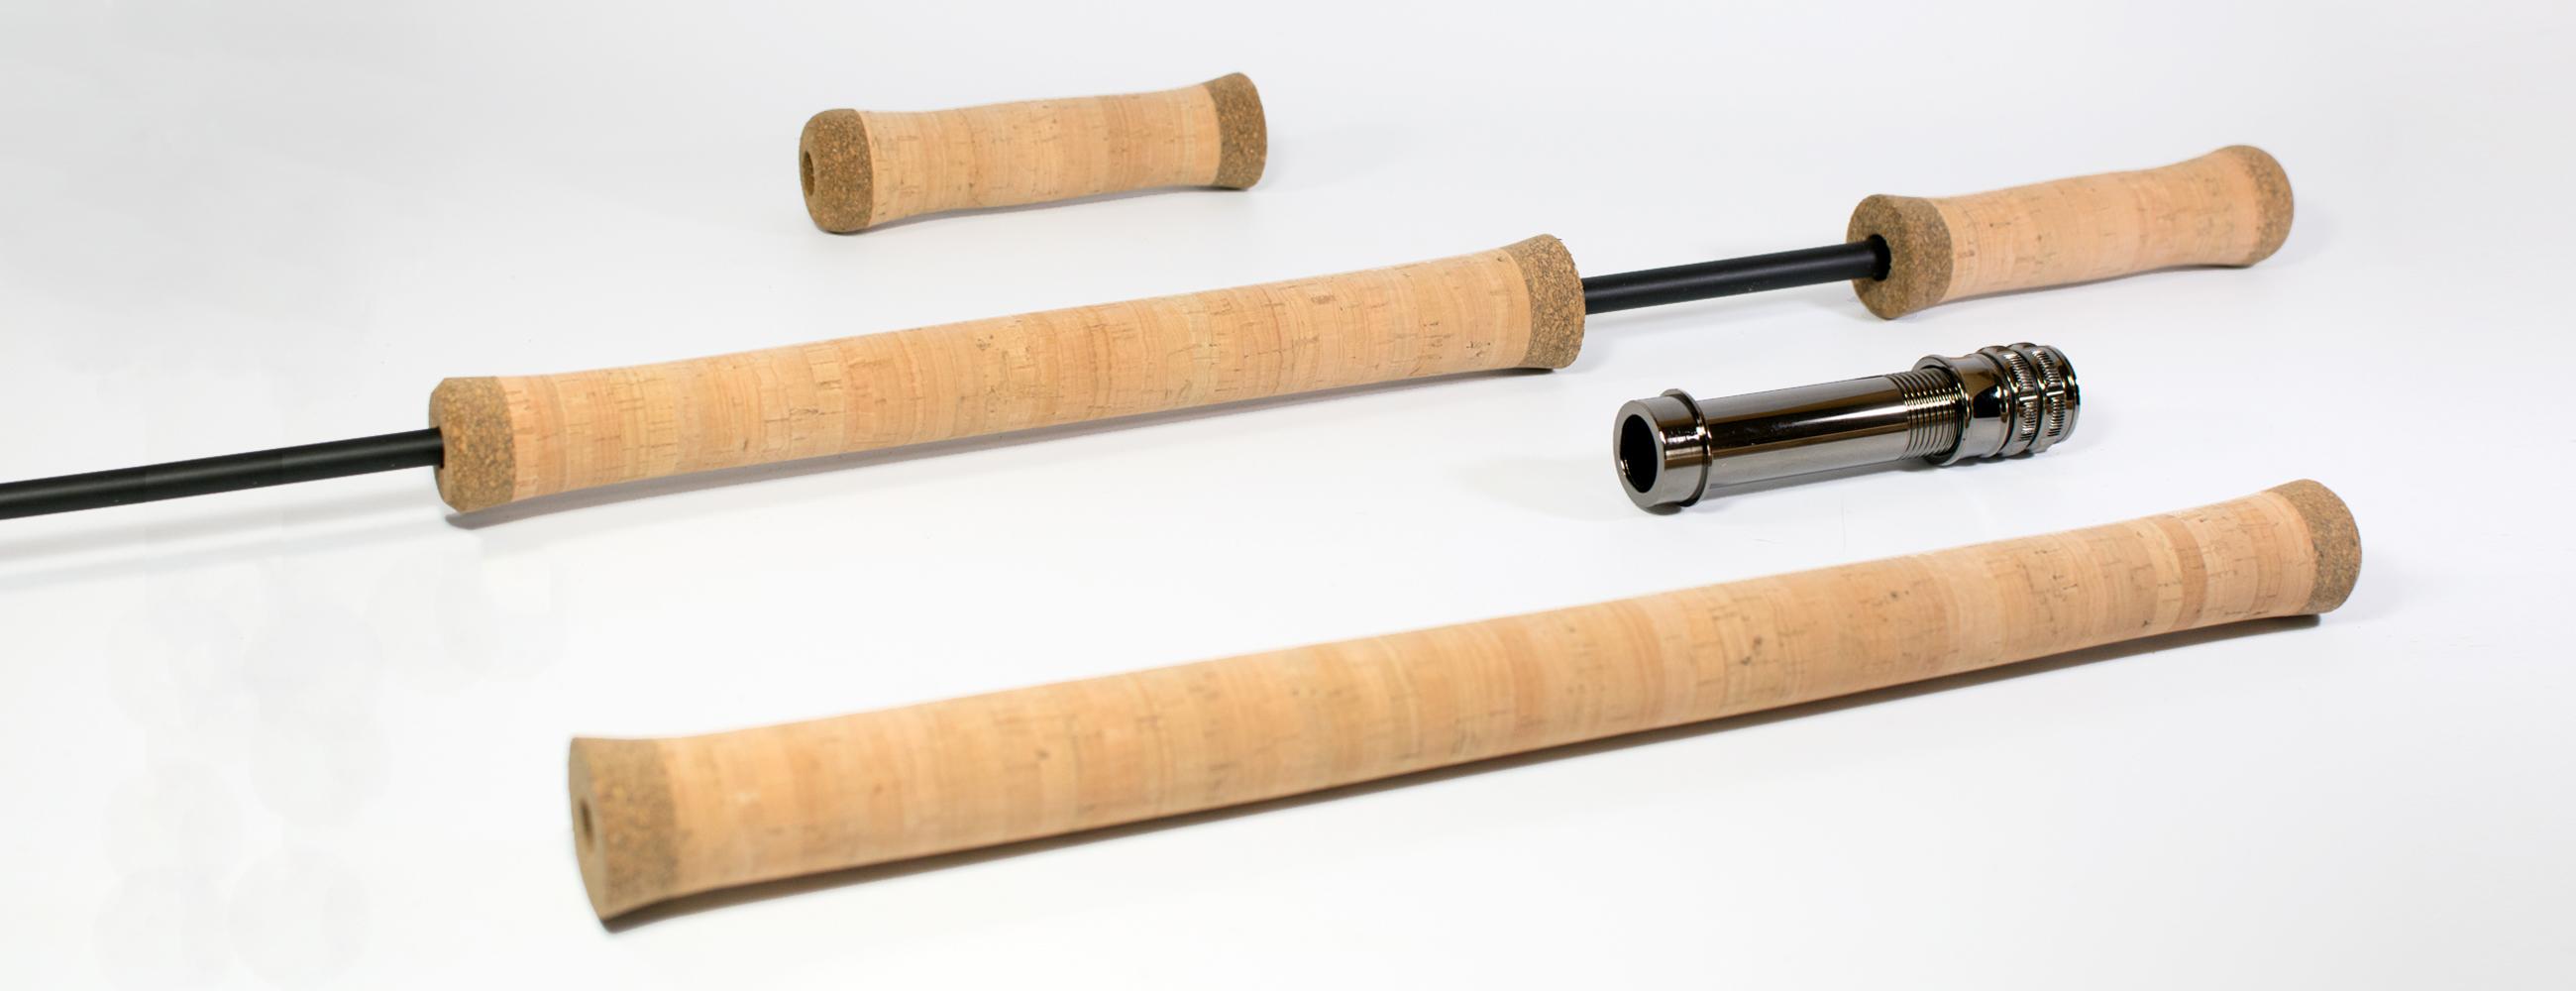 Spey and switch rod cork handles